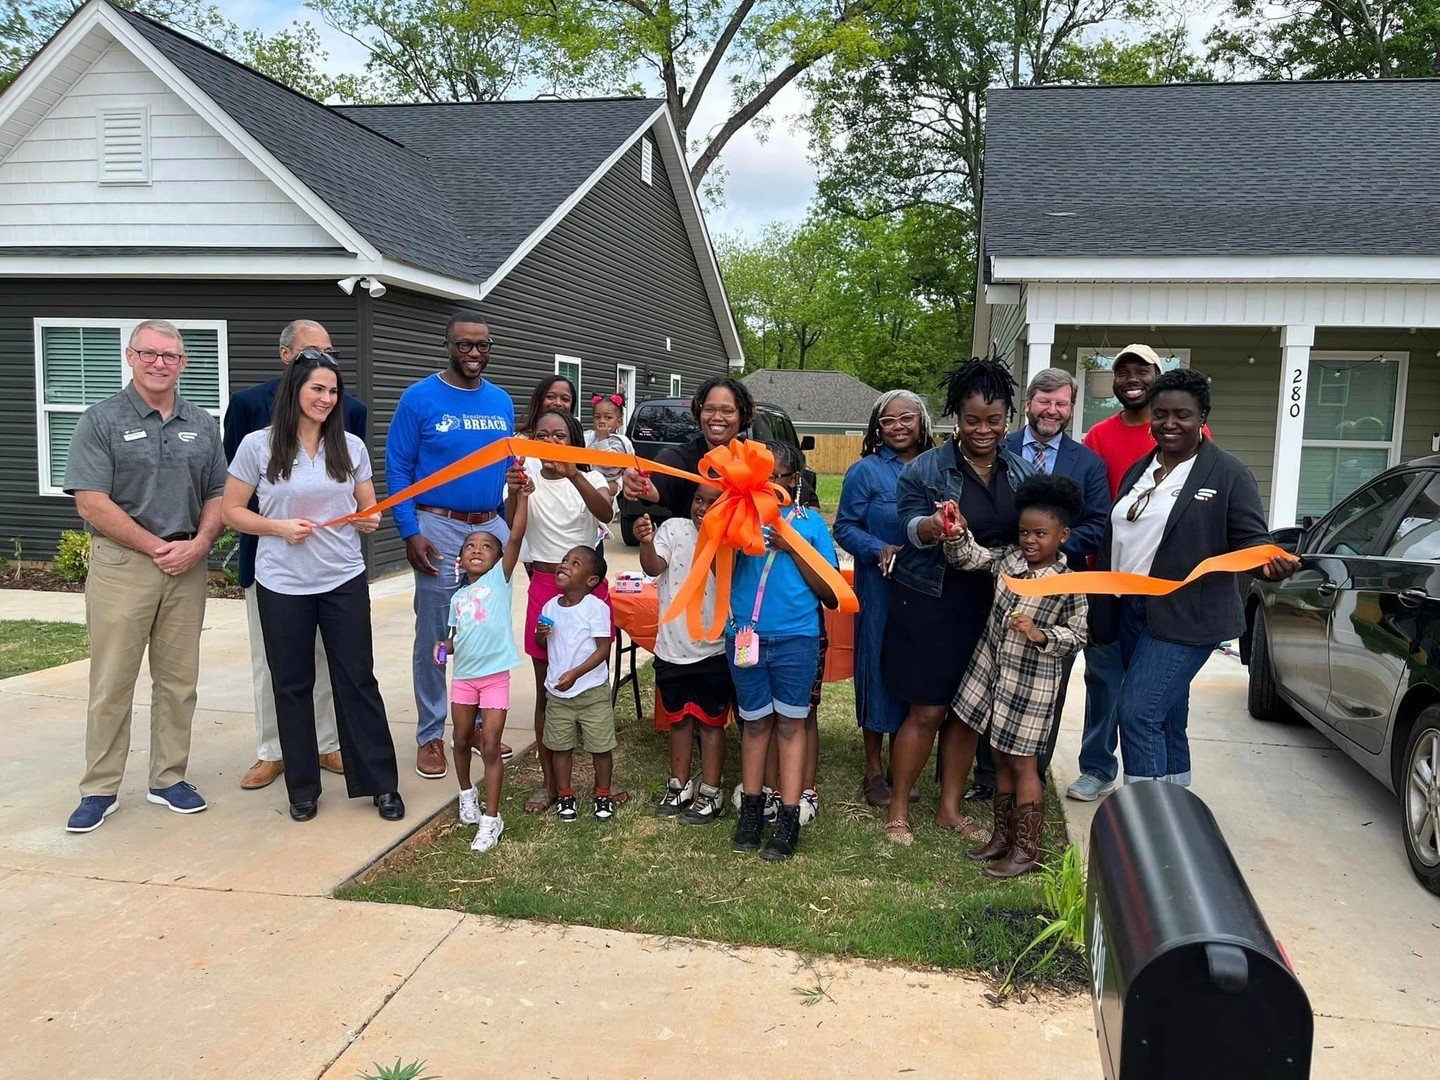 This week, we've been reflecting on the Moving Families Forward home dedications! Three single moms in Spartanburg community worked hard alongside our community partners to become homeowners. We are all so proud of you all! Congratulations 🧡
Thank y